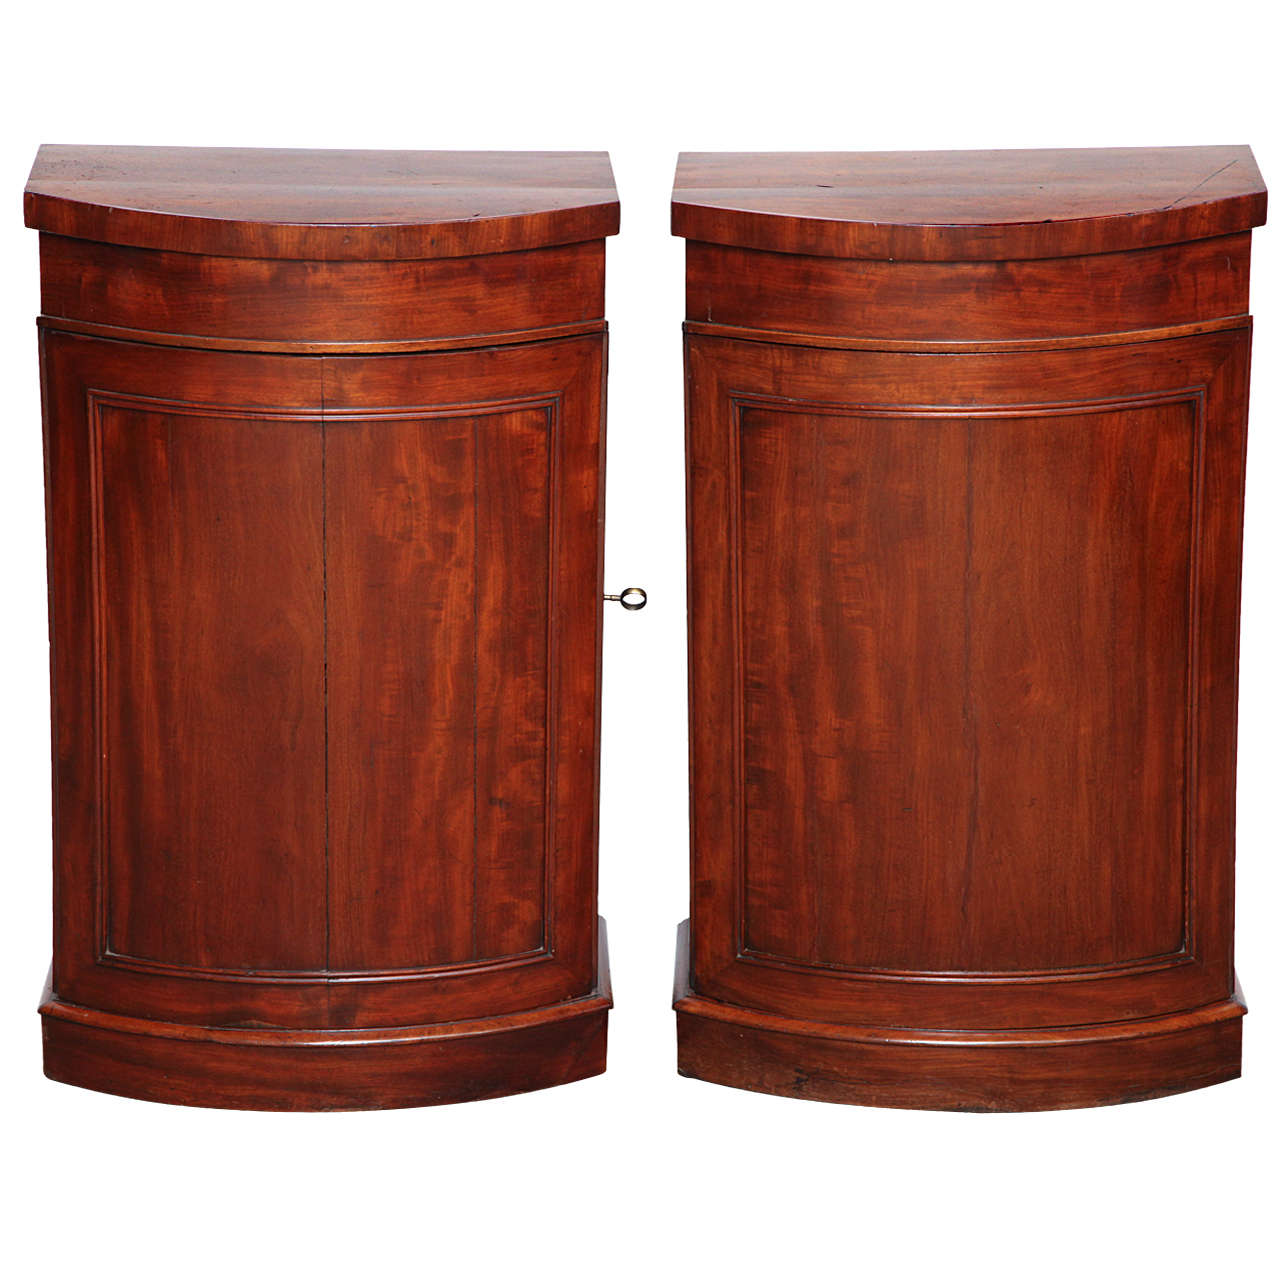 Pair of Early 19th Century Danish, Mahogany Cupboards For Sale